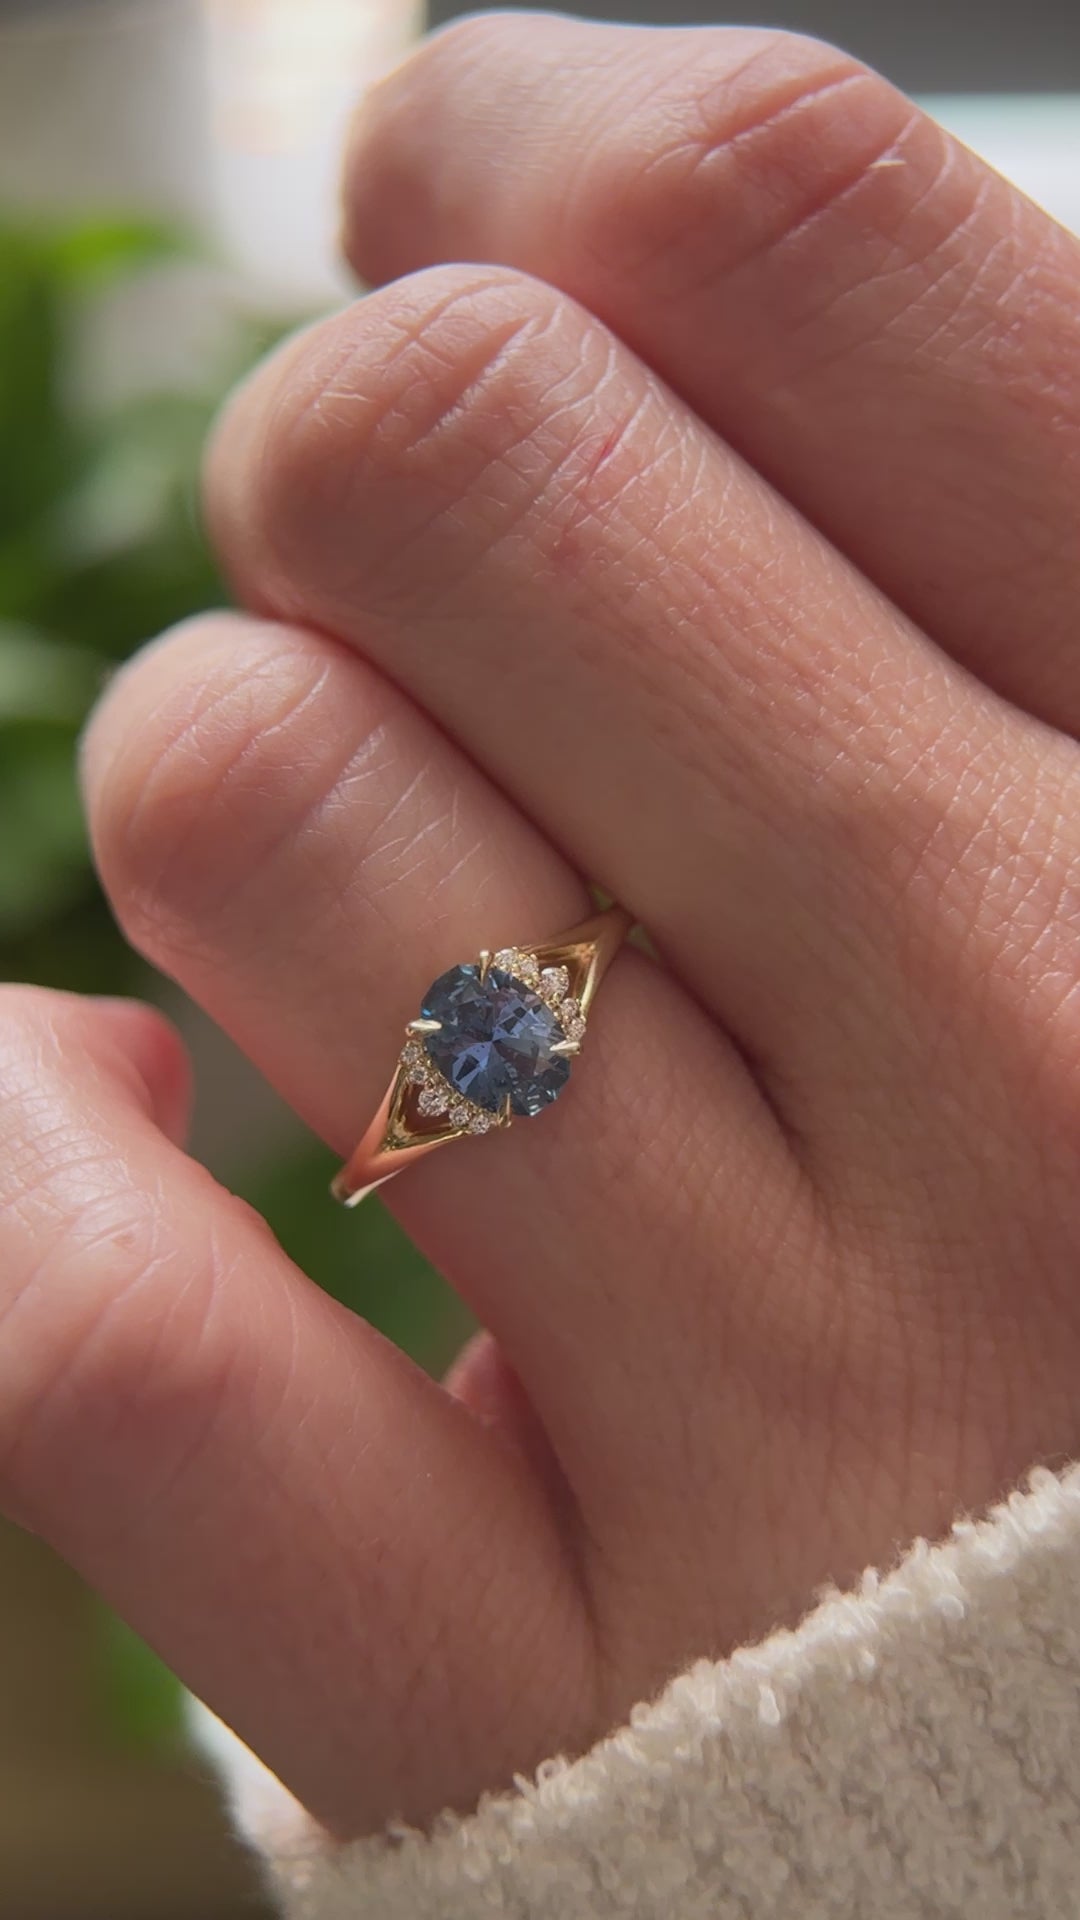 The Serendipity Ring - 1 CT Oval Blue Sapphire